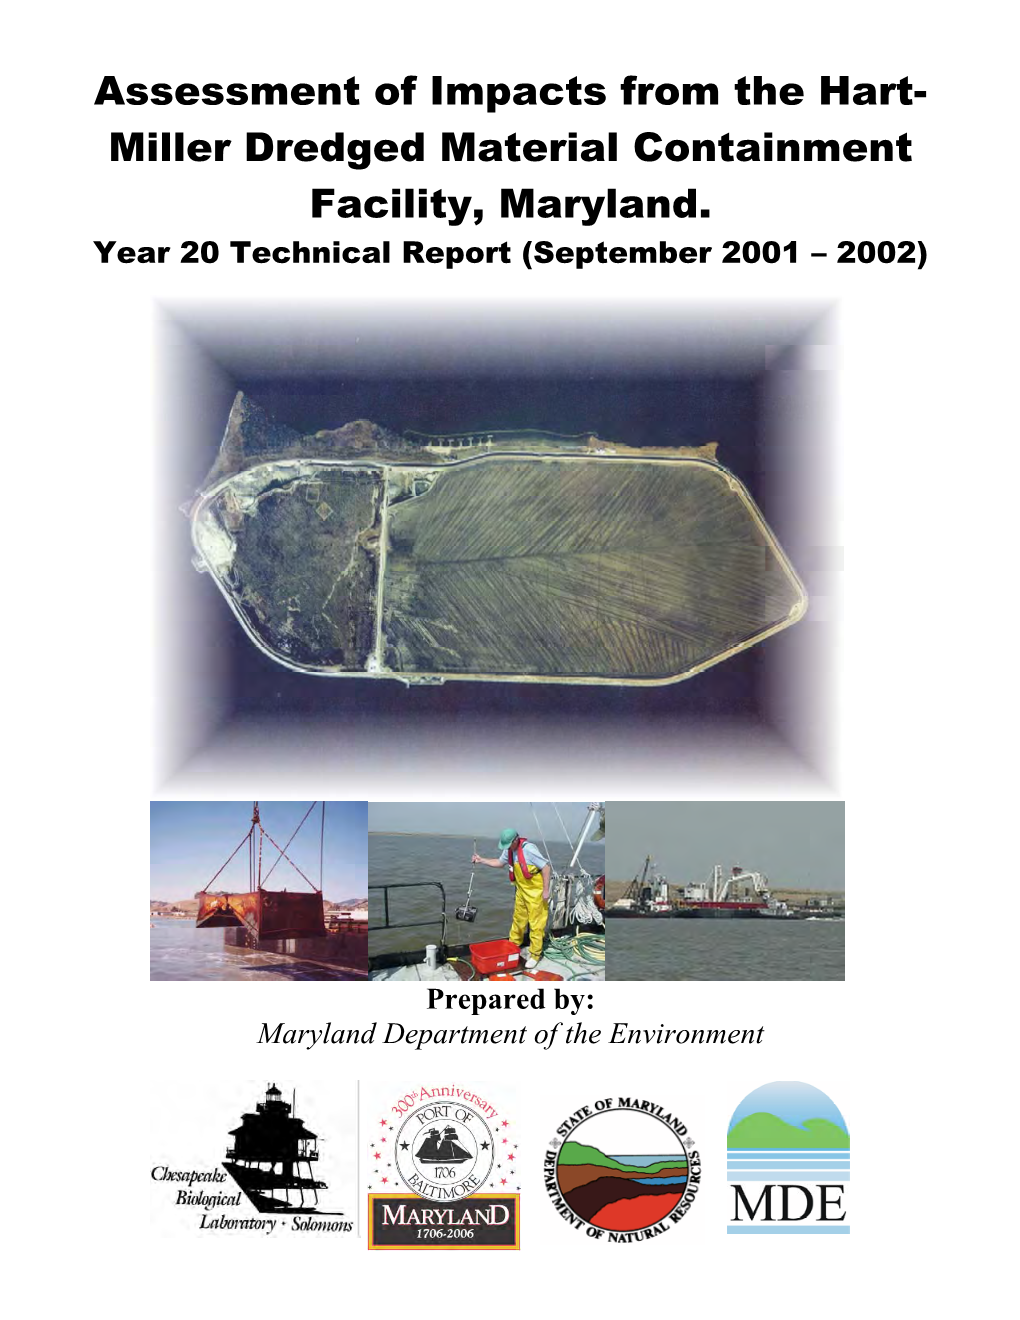 Assessment of Impacts from the Hart- Miller Dredged Material Containment Facility, Maryland. Year 20 Technical Report (September 2001 – 2002)